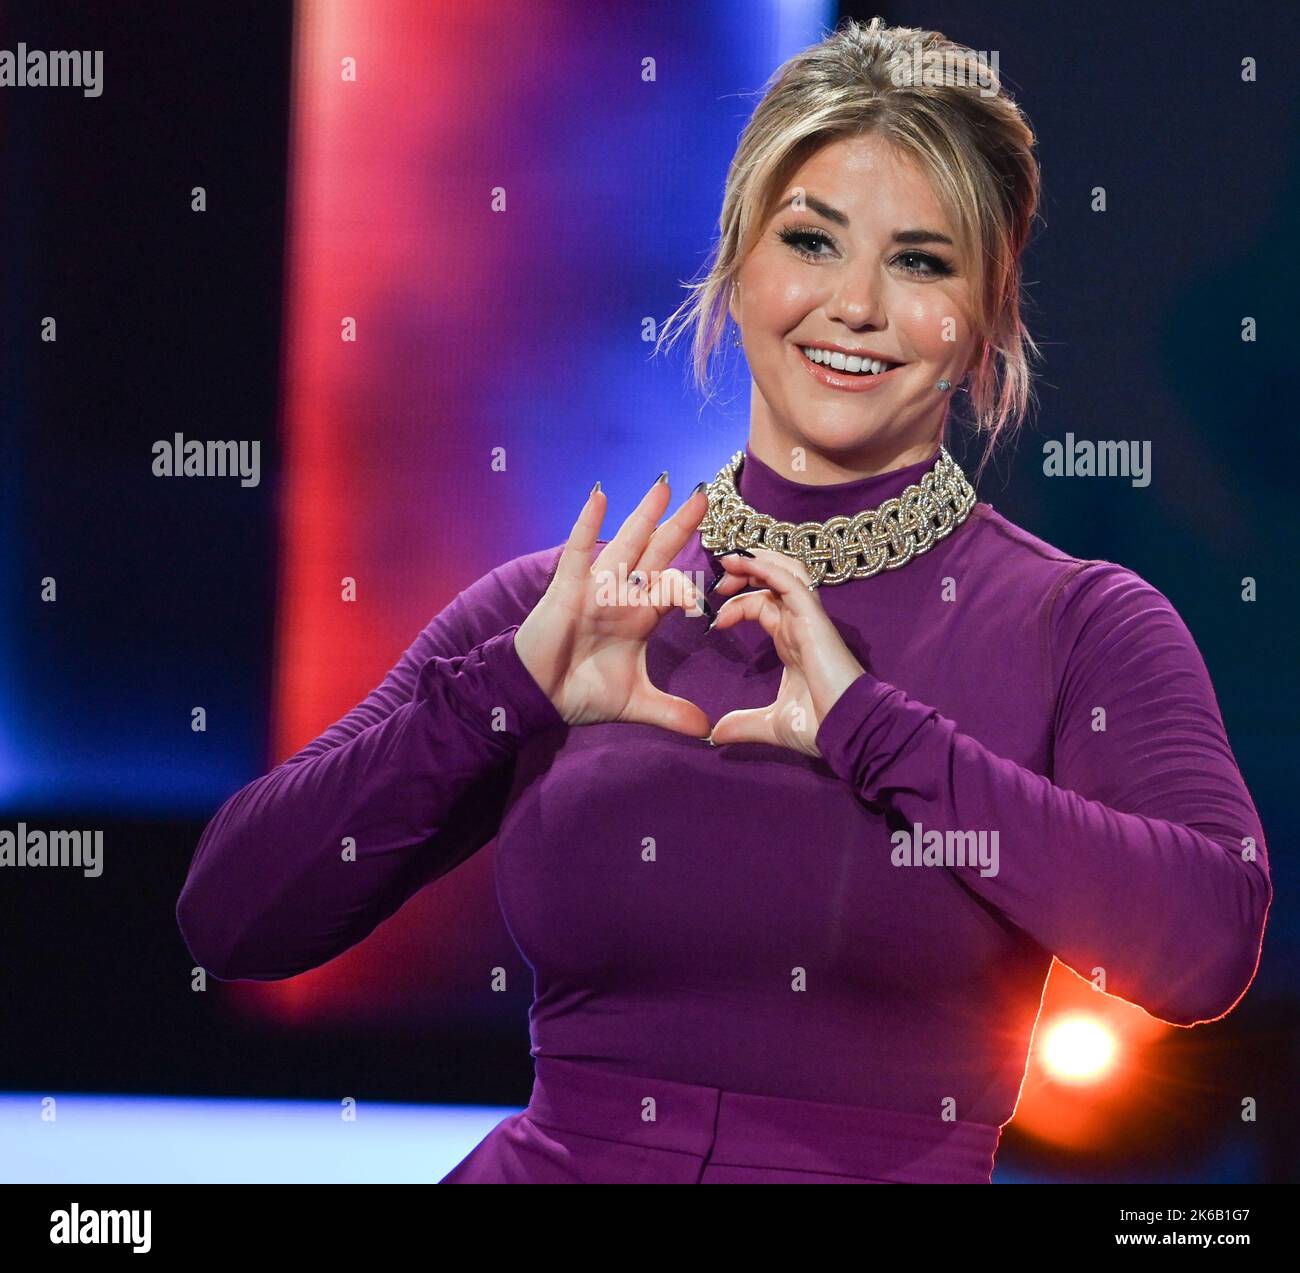 Berlin, Germany. 11th Oct, 2022. Singer and presenter Beatrice Egli is on stage during the recording of the 'Beatrice Egli Show' in Berlin-Adlershof. The show can be seen on November 26, 2022. SWR television, MDR television and Swiss television SRF are involved. Credit: Jens Kalaene/dpa/Alamy Live News Stock Photo